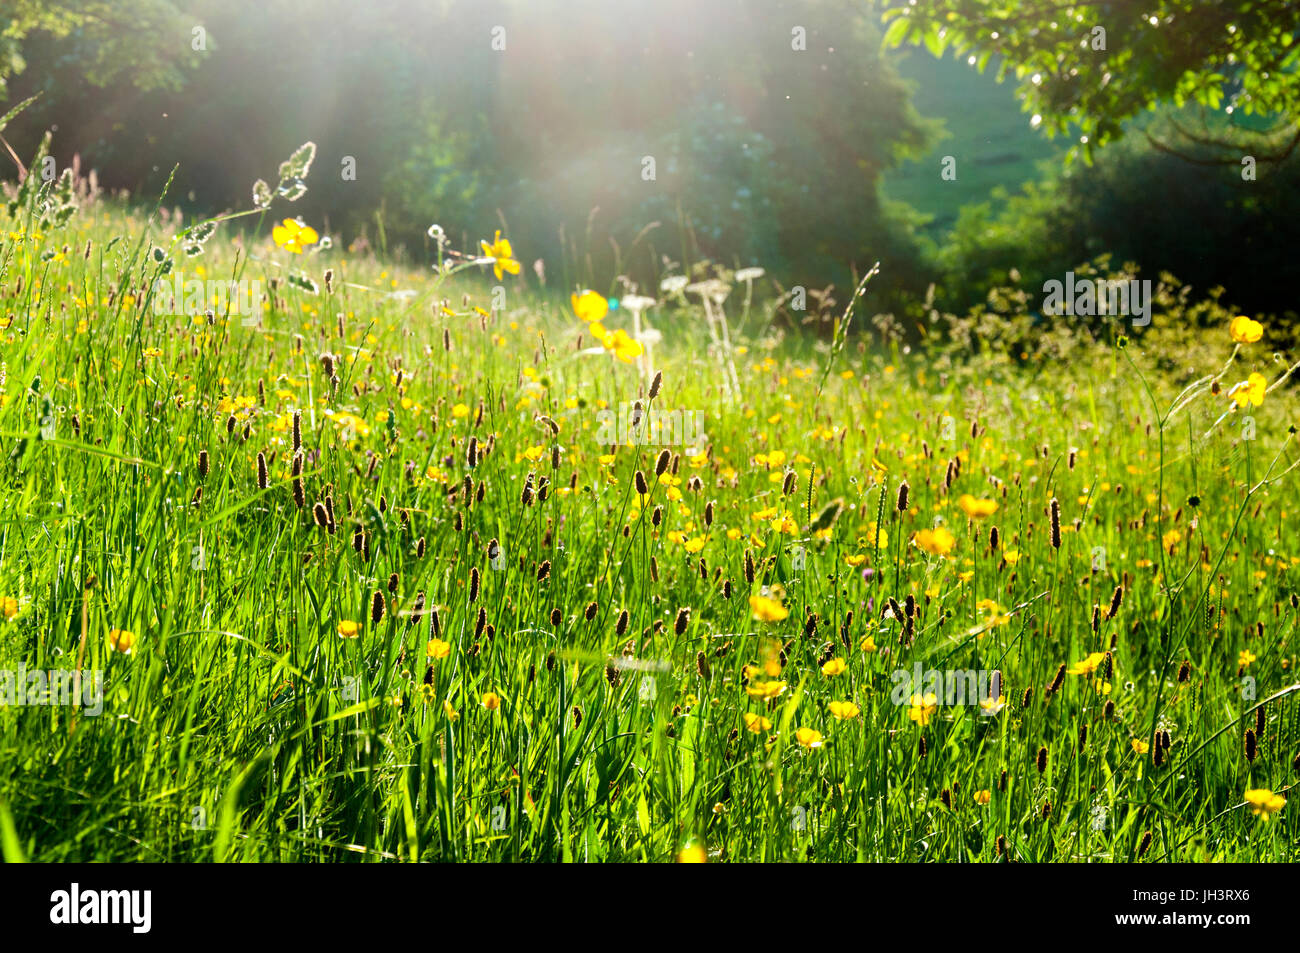 English countryside rural meadow with wild flowers in summer evening sunshine light Stock Photo